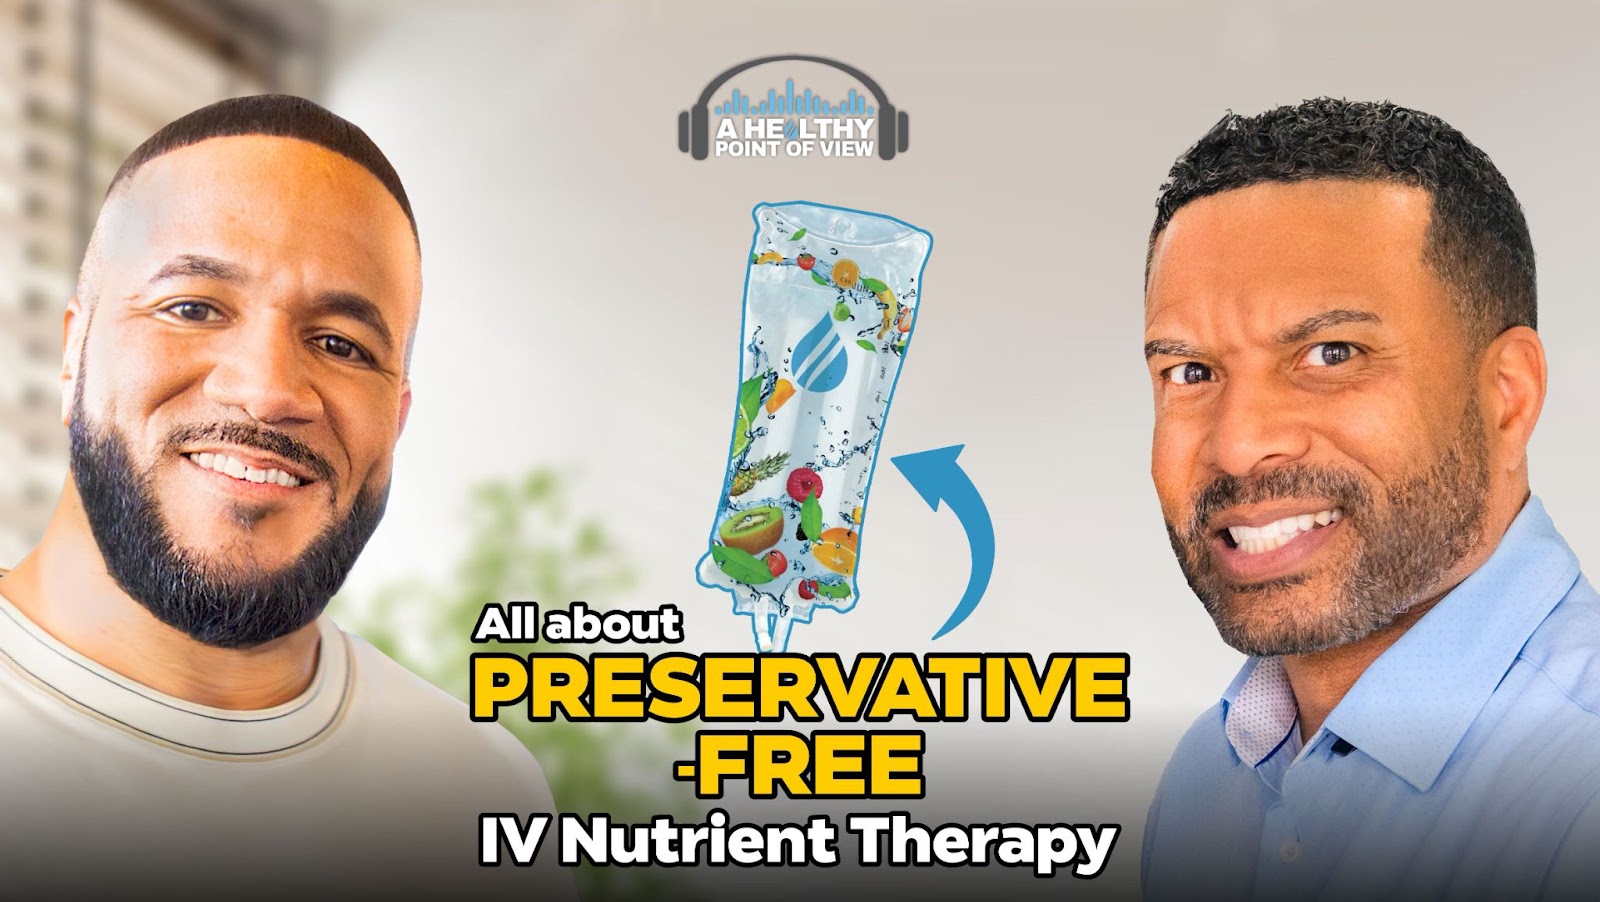 What Are the Concerns Surrounding Preservatives in IV Nutrient Therapy?